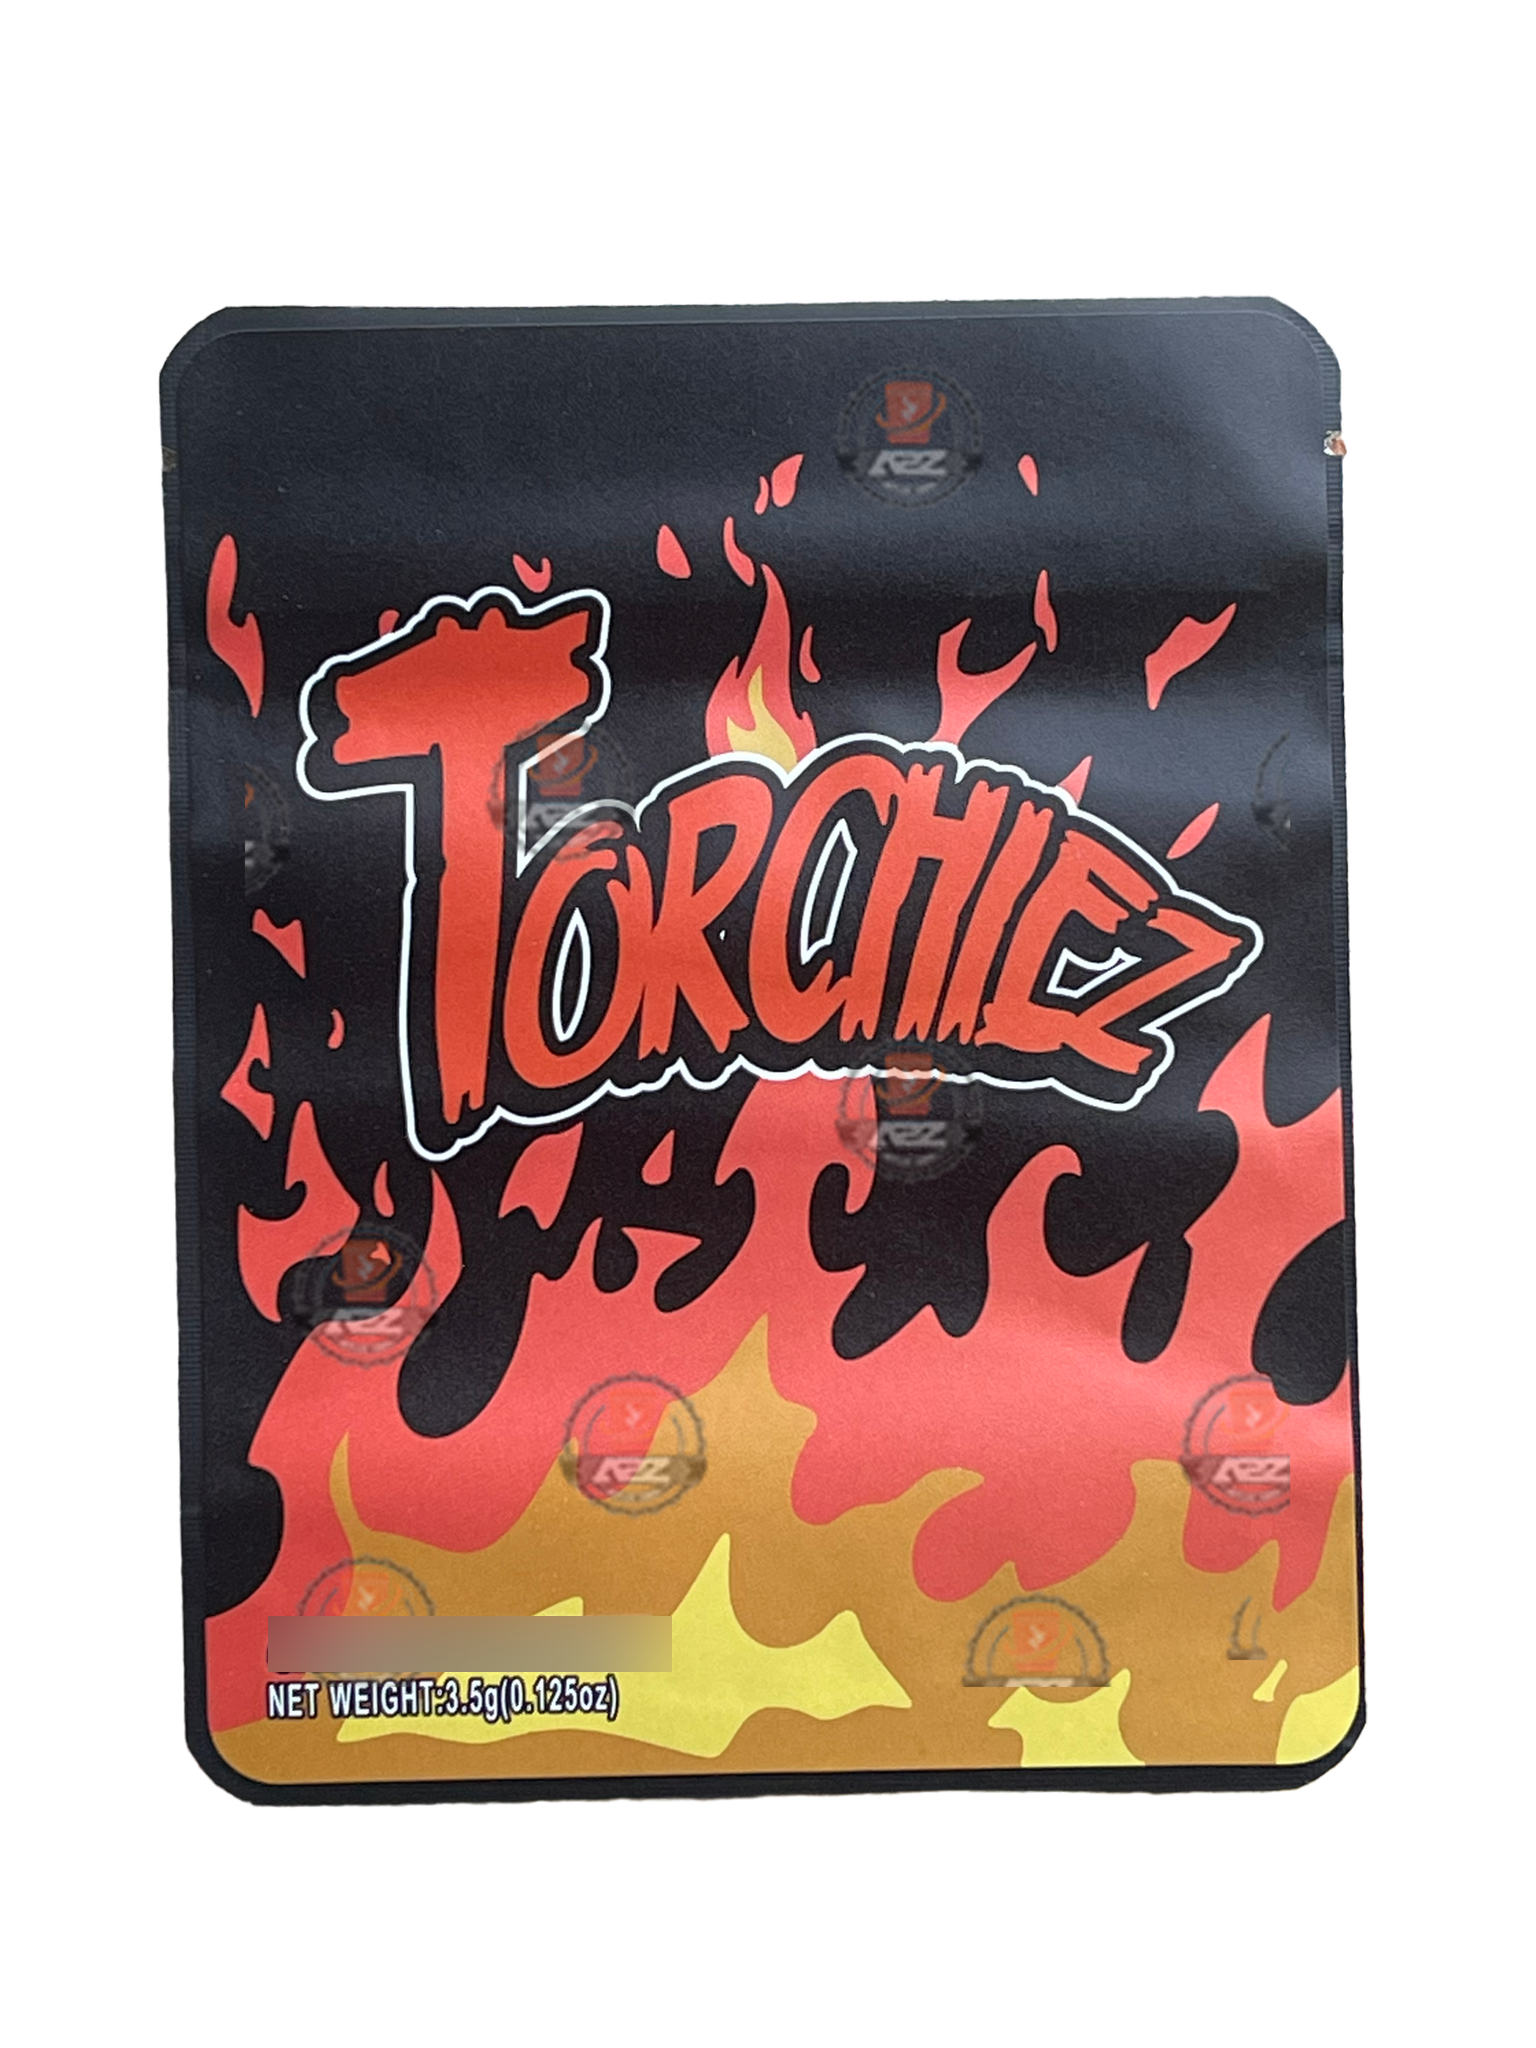 Sprinklez Torchiez Mylar Bags 3.5g Sticker base Bag -With stickers and labels